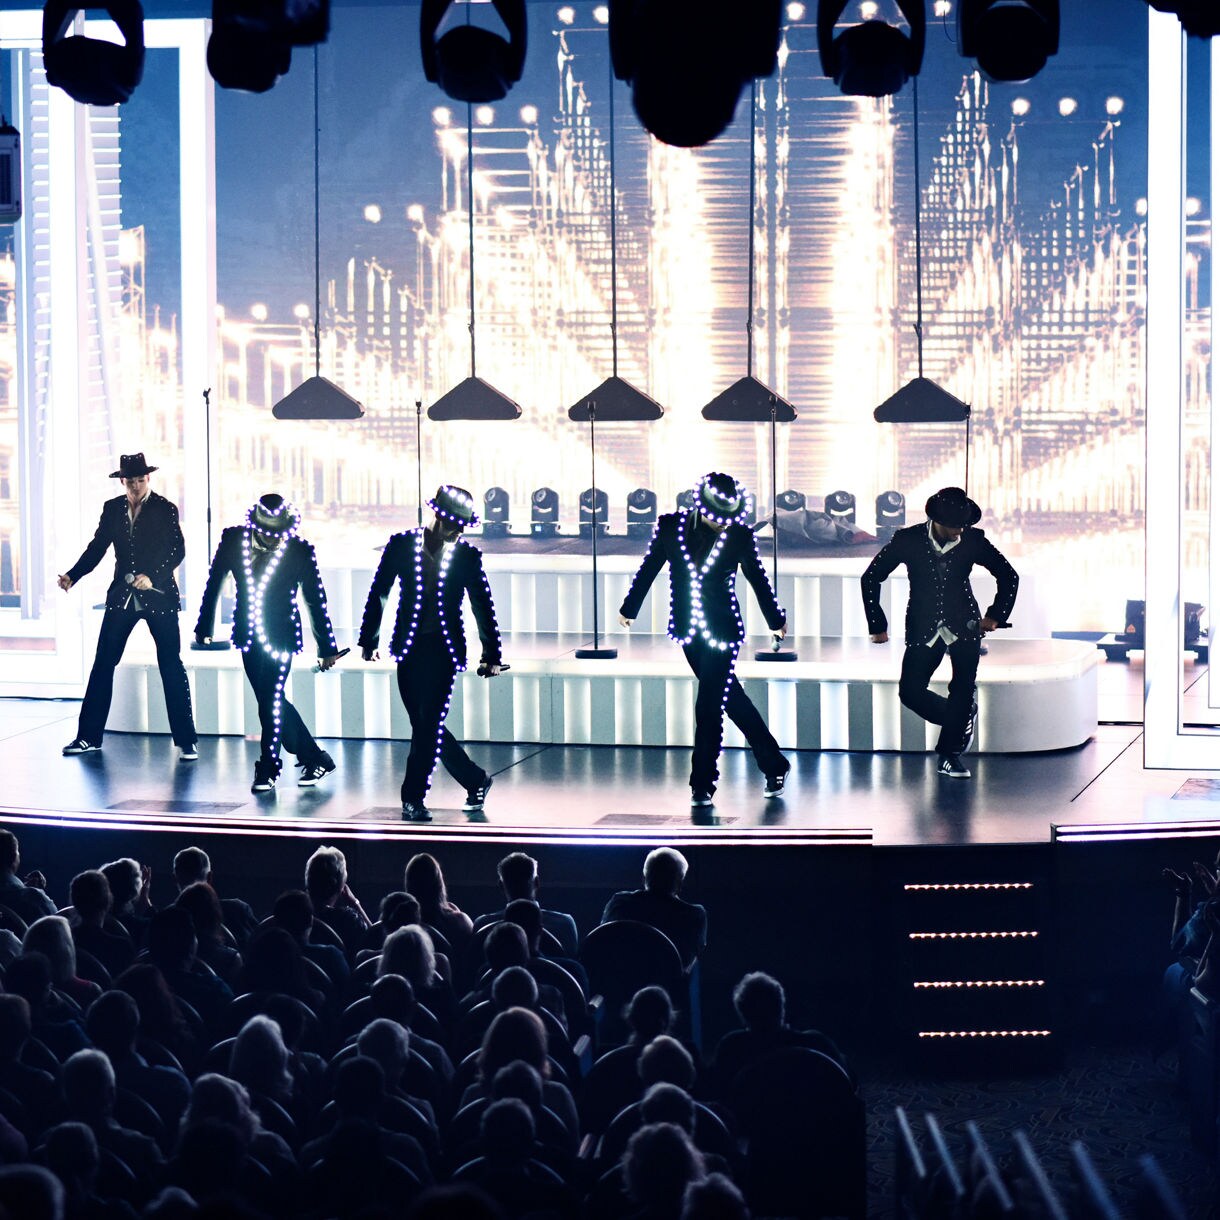 https://assets.princess.com/is/image/princesscruises/production-shows-five-dancers-in-suits-on-stage:1x1-Square?ts=1698256575343